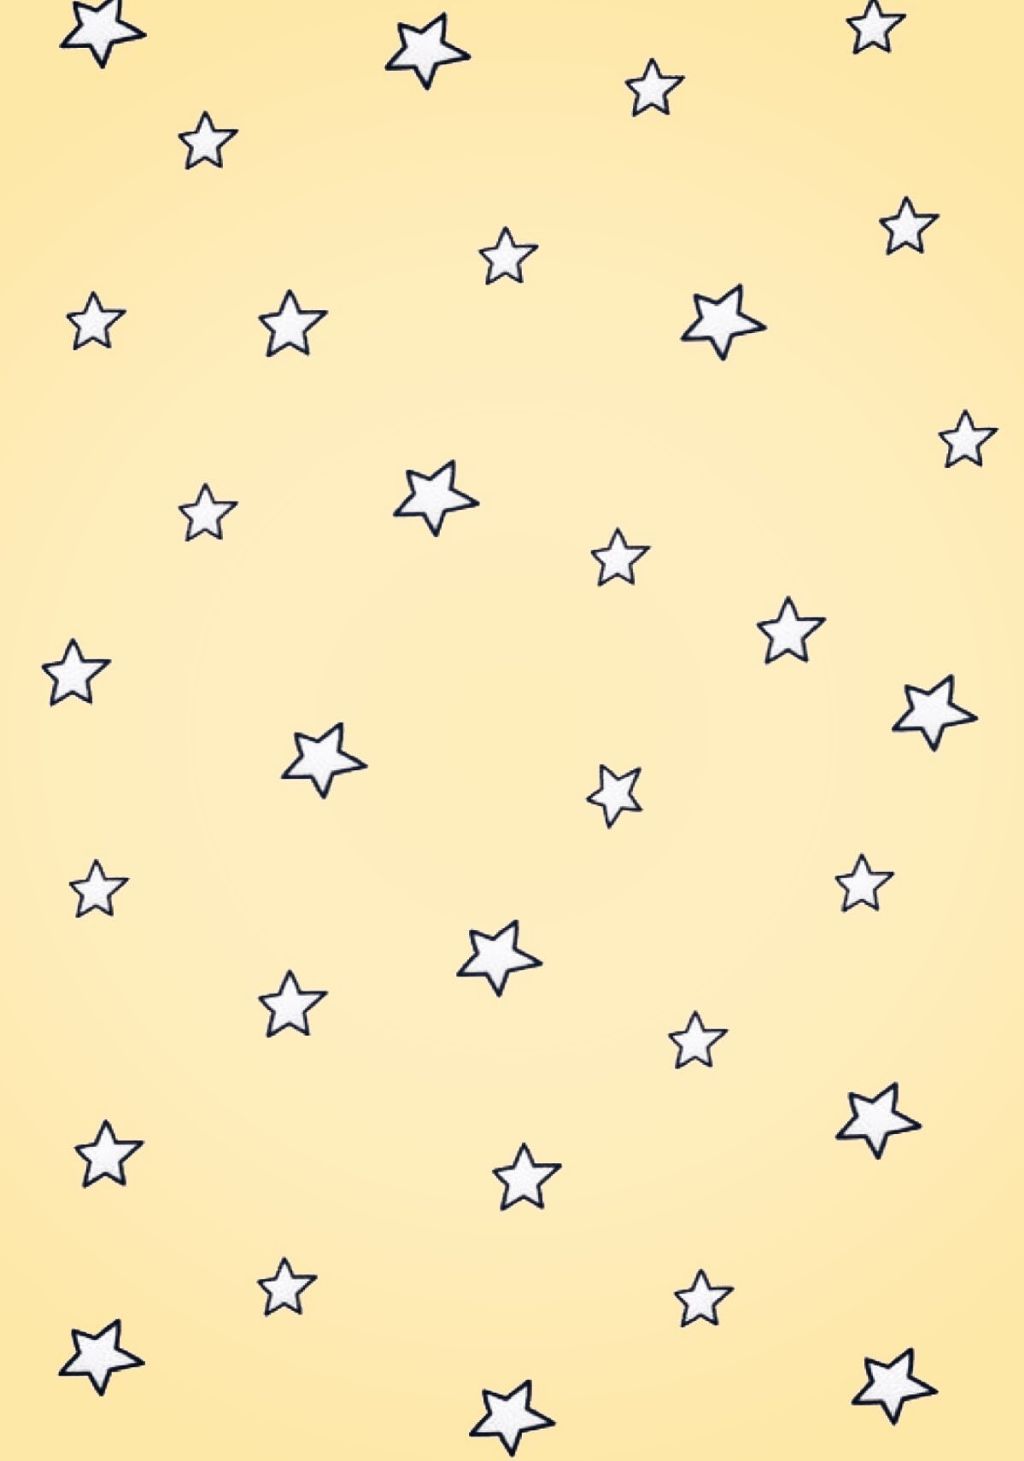 yellow #stars #wallpaper #tumblr #background #freetoedit - Alright Dude  Trip Over A Knife - 1024x1461 Wallpaper 